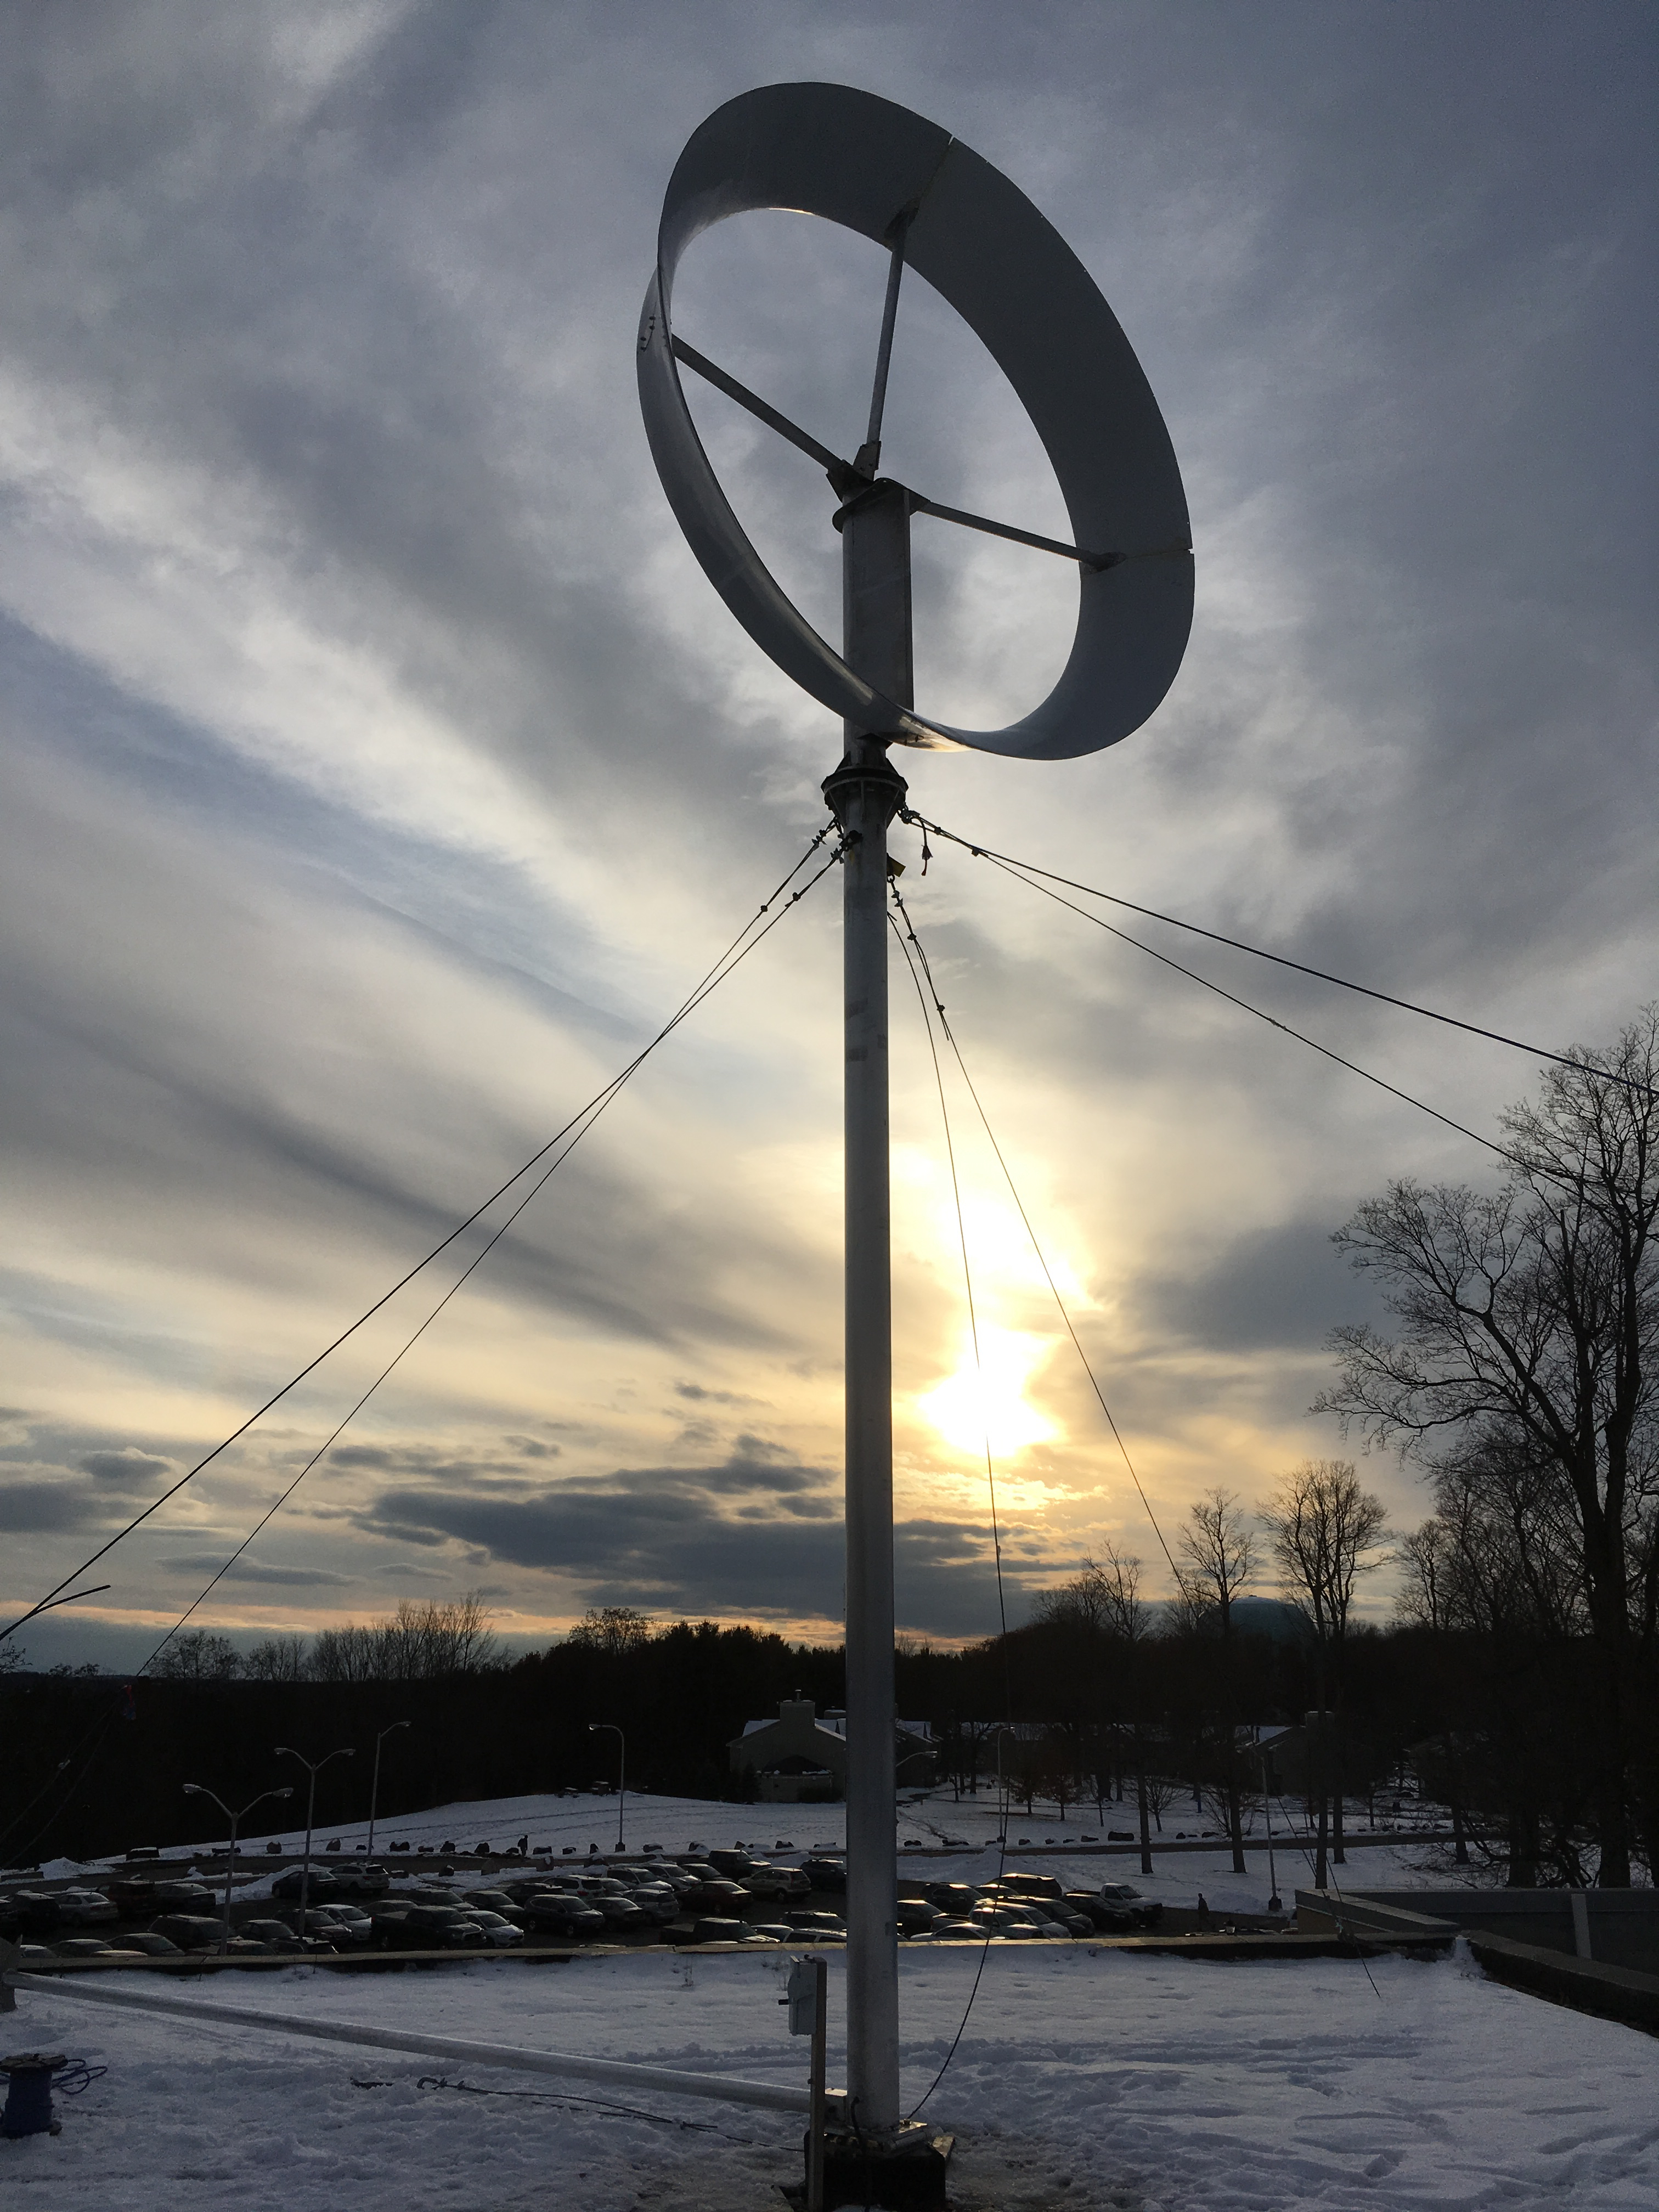 The new ducted wind turbine on the Clarkson University campus